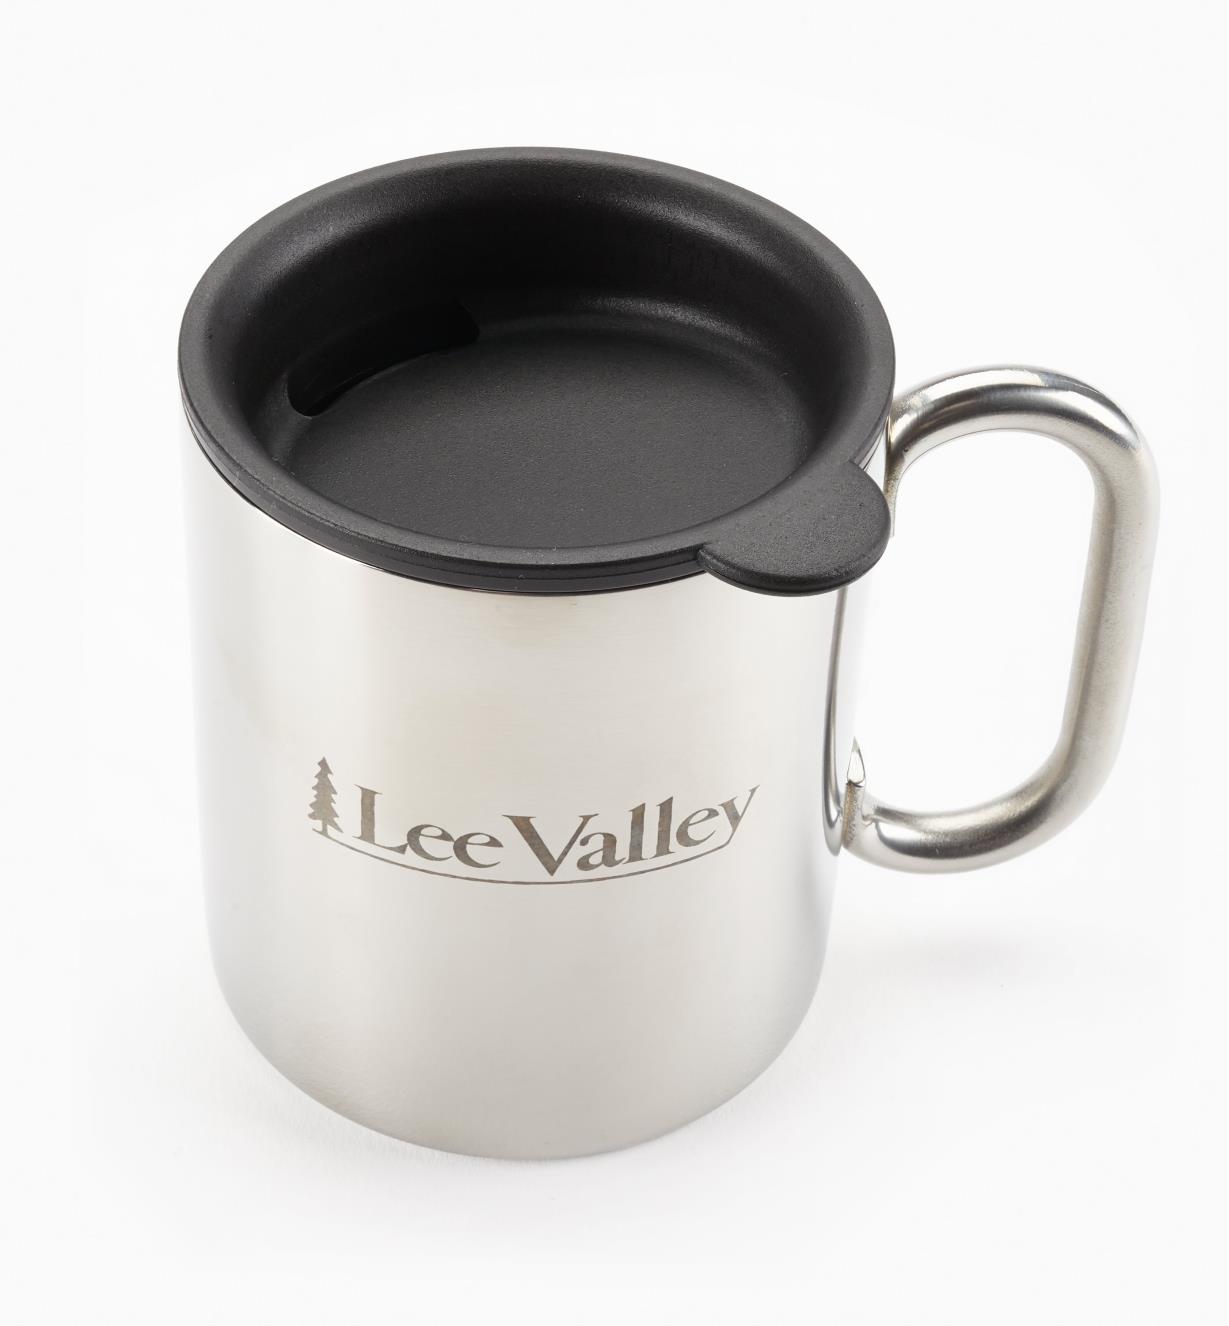 44K1704 - 9 oz Stainless Steel Insulated Mug, Lee Valley